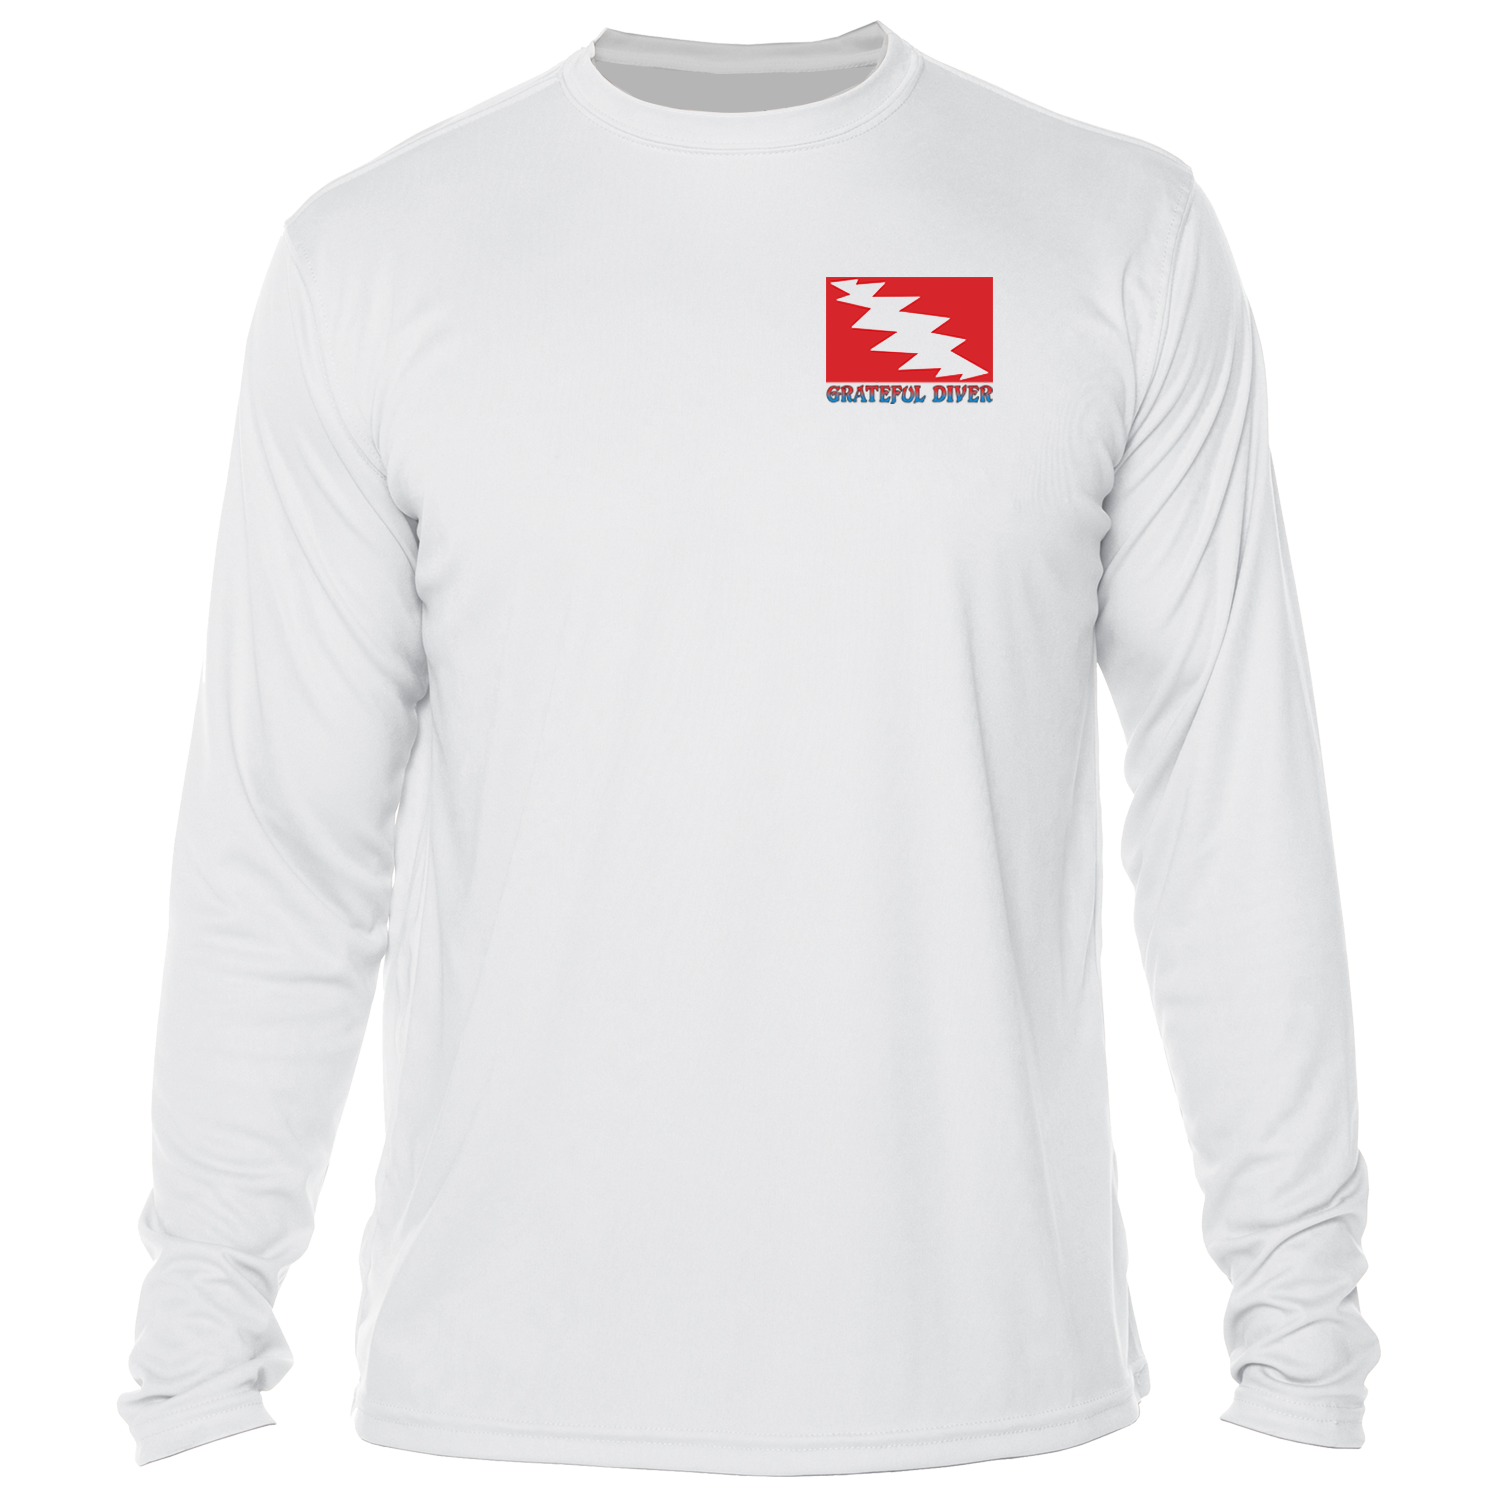 front of Grateful Diver's Artist's Collection: Island Life UV Shirt in white showing the classic dive flag logo